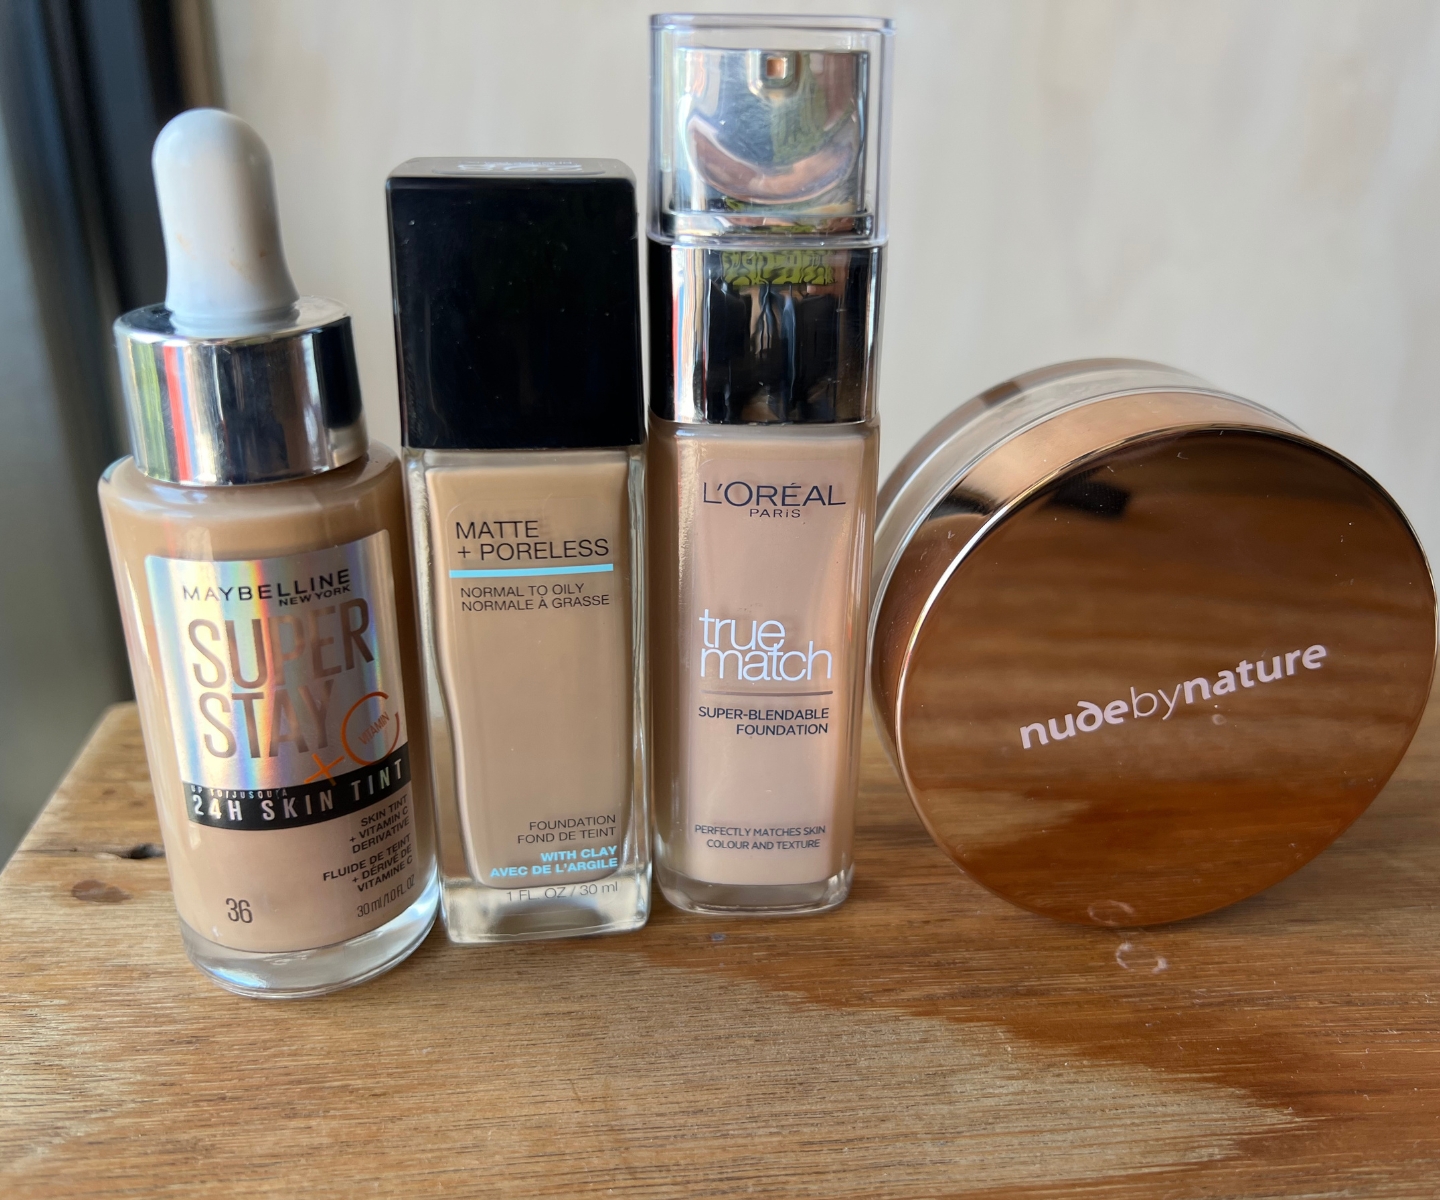 Best cheap Foundation for Oily Skin Maybelline Loreal Nude by nature